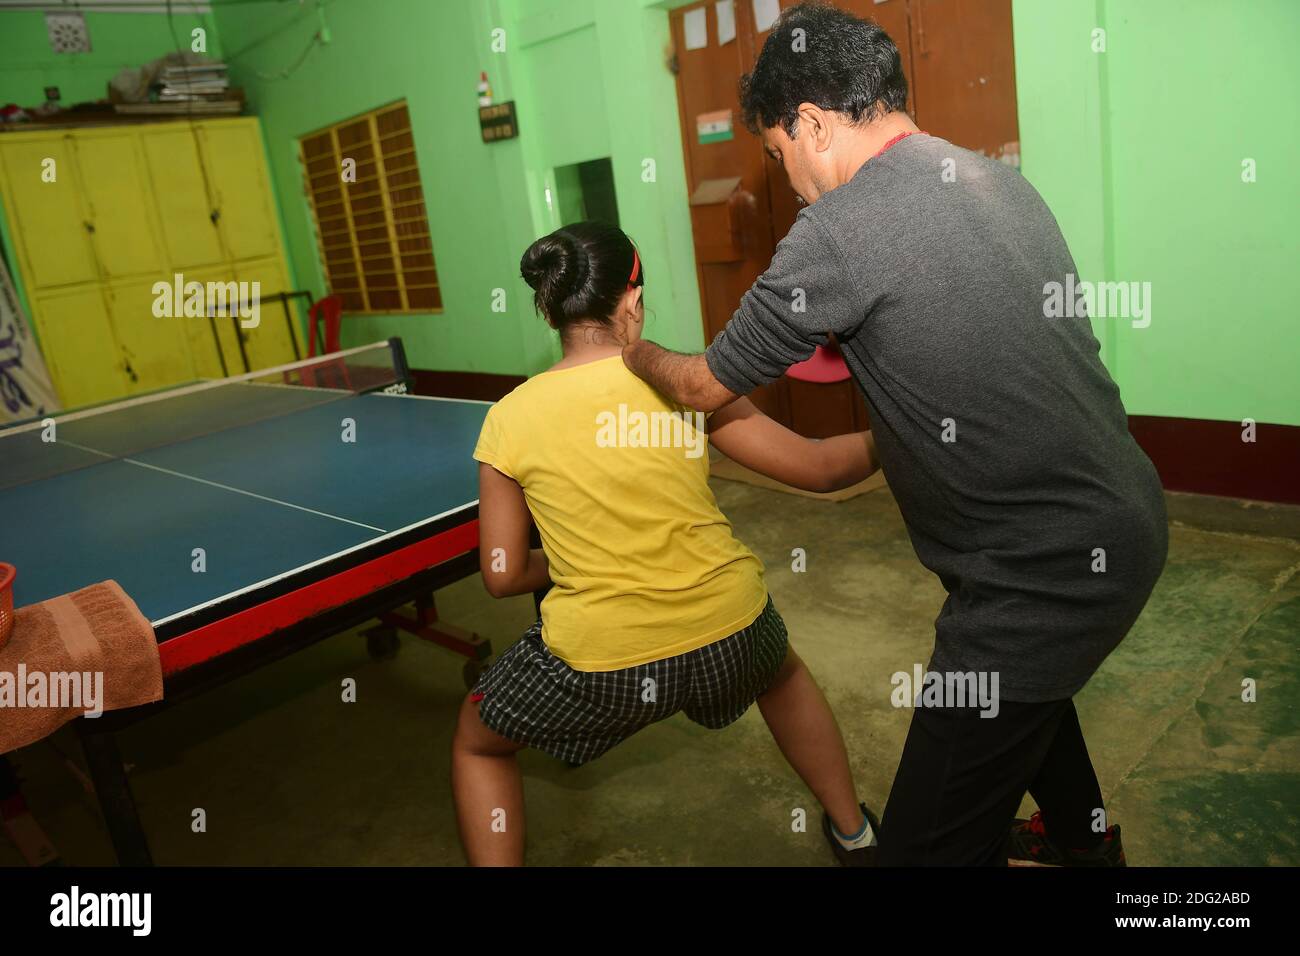 Kajol Dey, a 49 year old disabled table tennis player and coach is seen coaching a young girl at his coaching camp on International Day of Persons with Disabilities (IDPD). Agartala, Tripura, India. Stock Photo